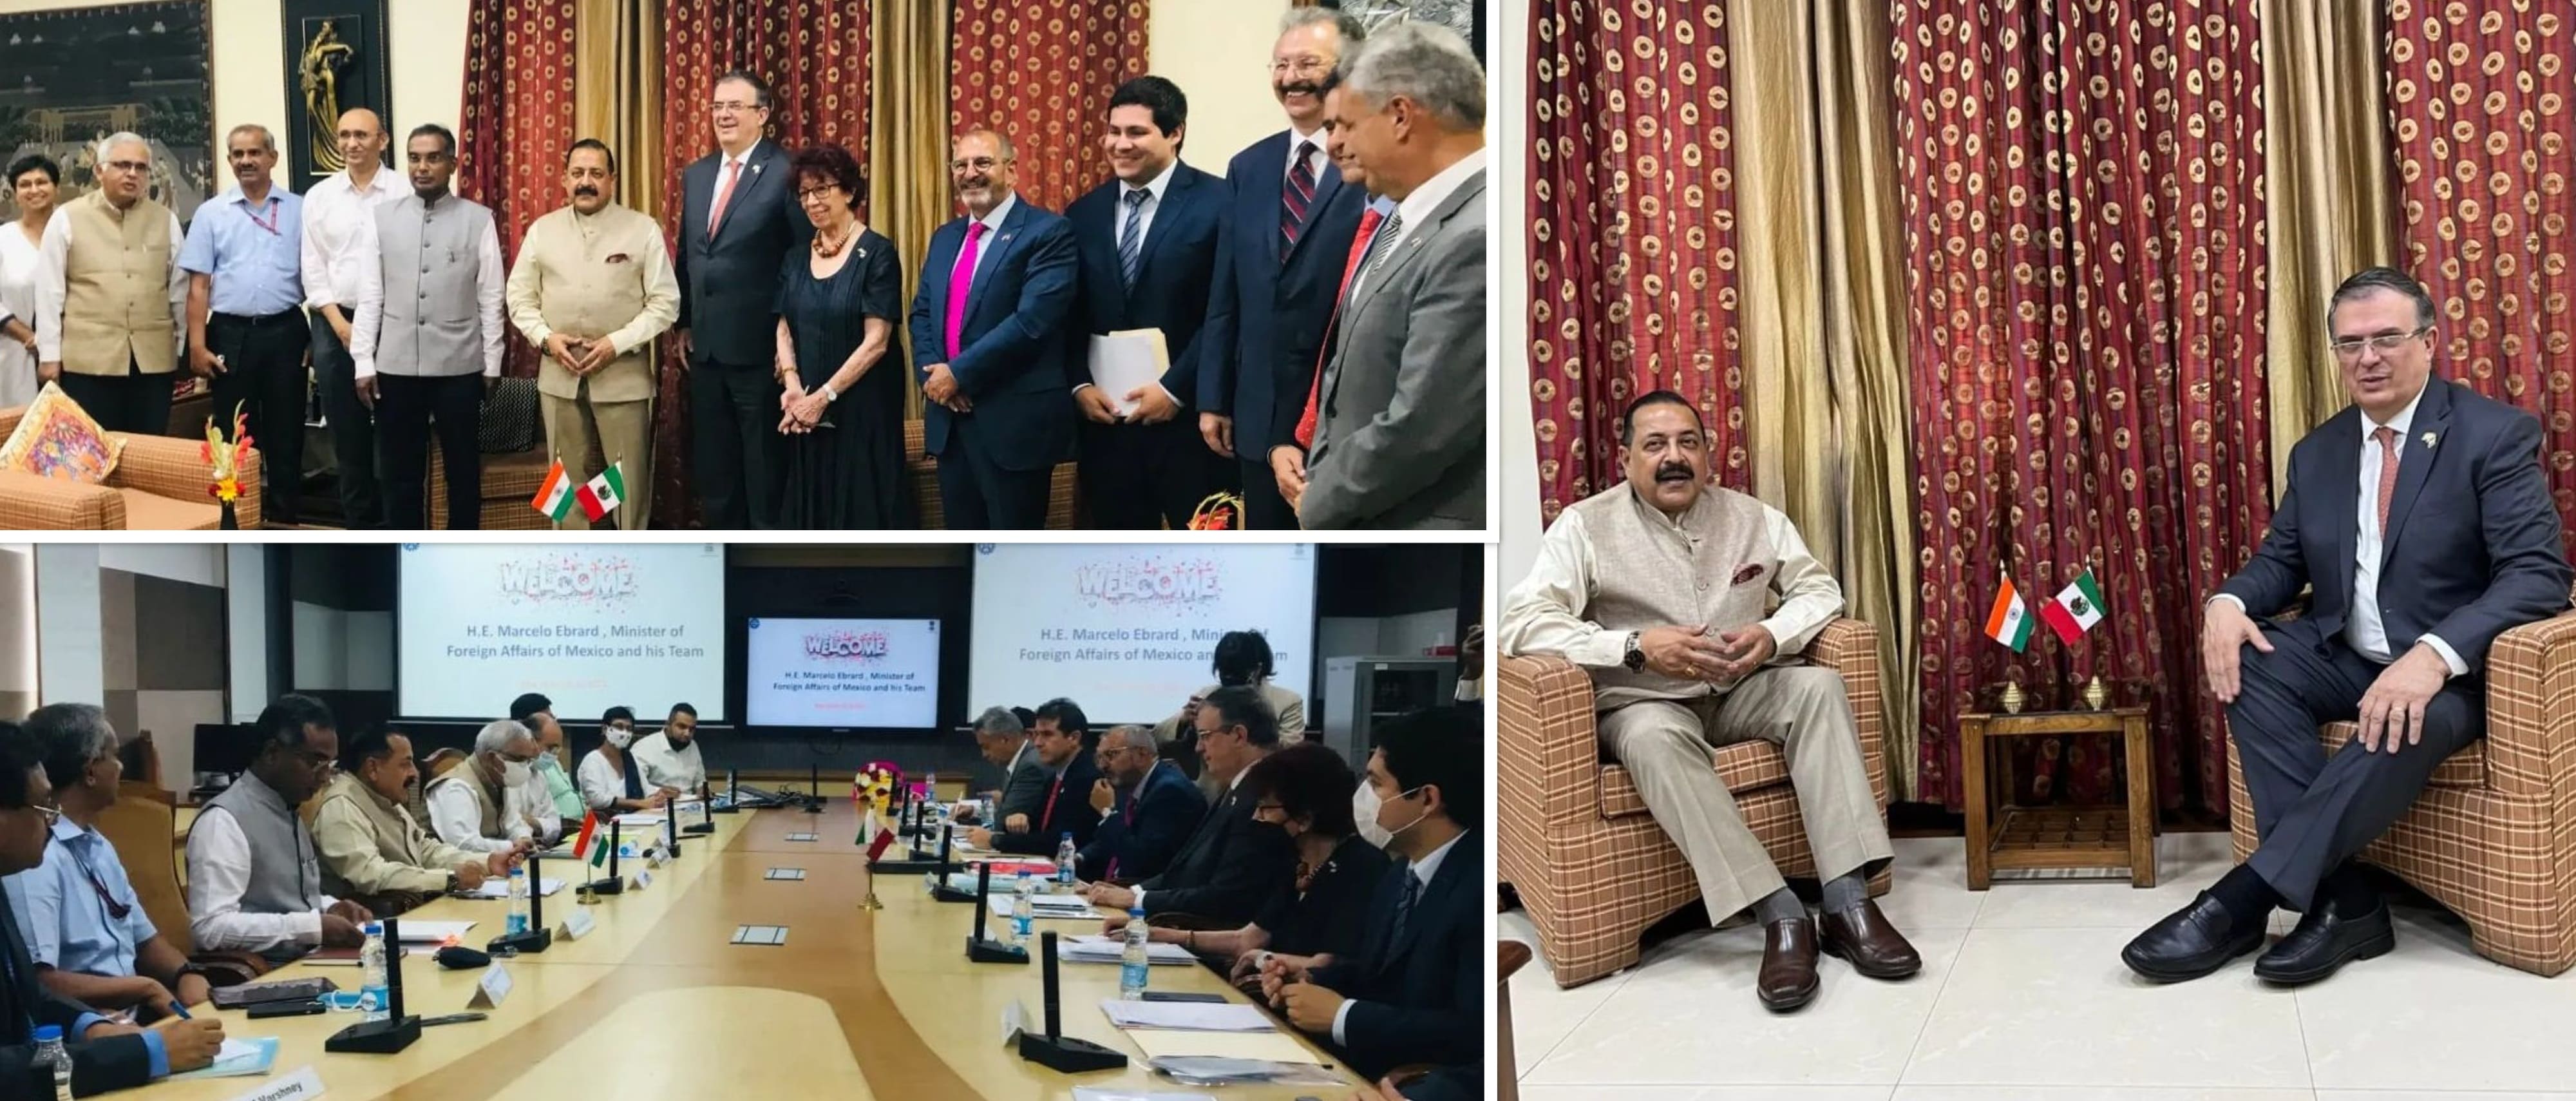  <div style="fcolor: #fff; font-weight: 600; font-size: 1.5em;">
<p style="font-size: 13.8px;">Foreign Minister of Mexico H.E. Mr.Marcelo Ebrard ,currently on India visit, called on Honorable Minister of State for Science & Technology Dr.Jitendra Singh along with a high level delegation.
They discussed about strengthening existing cooperation and ways of extending it to new areas like digital health,genomics & biotechnology, green revolution, Space etc. <br /><span style="text-align: center;">30 March 2022</span></p>
</div>